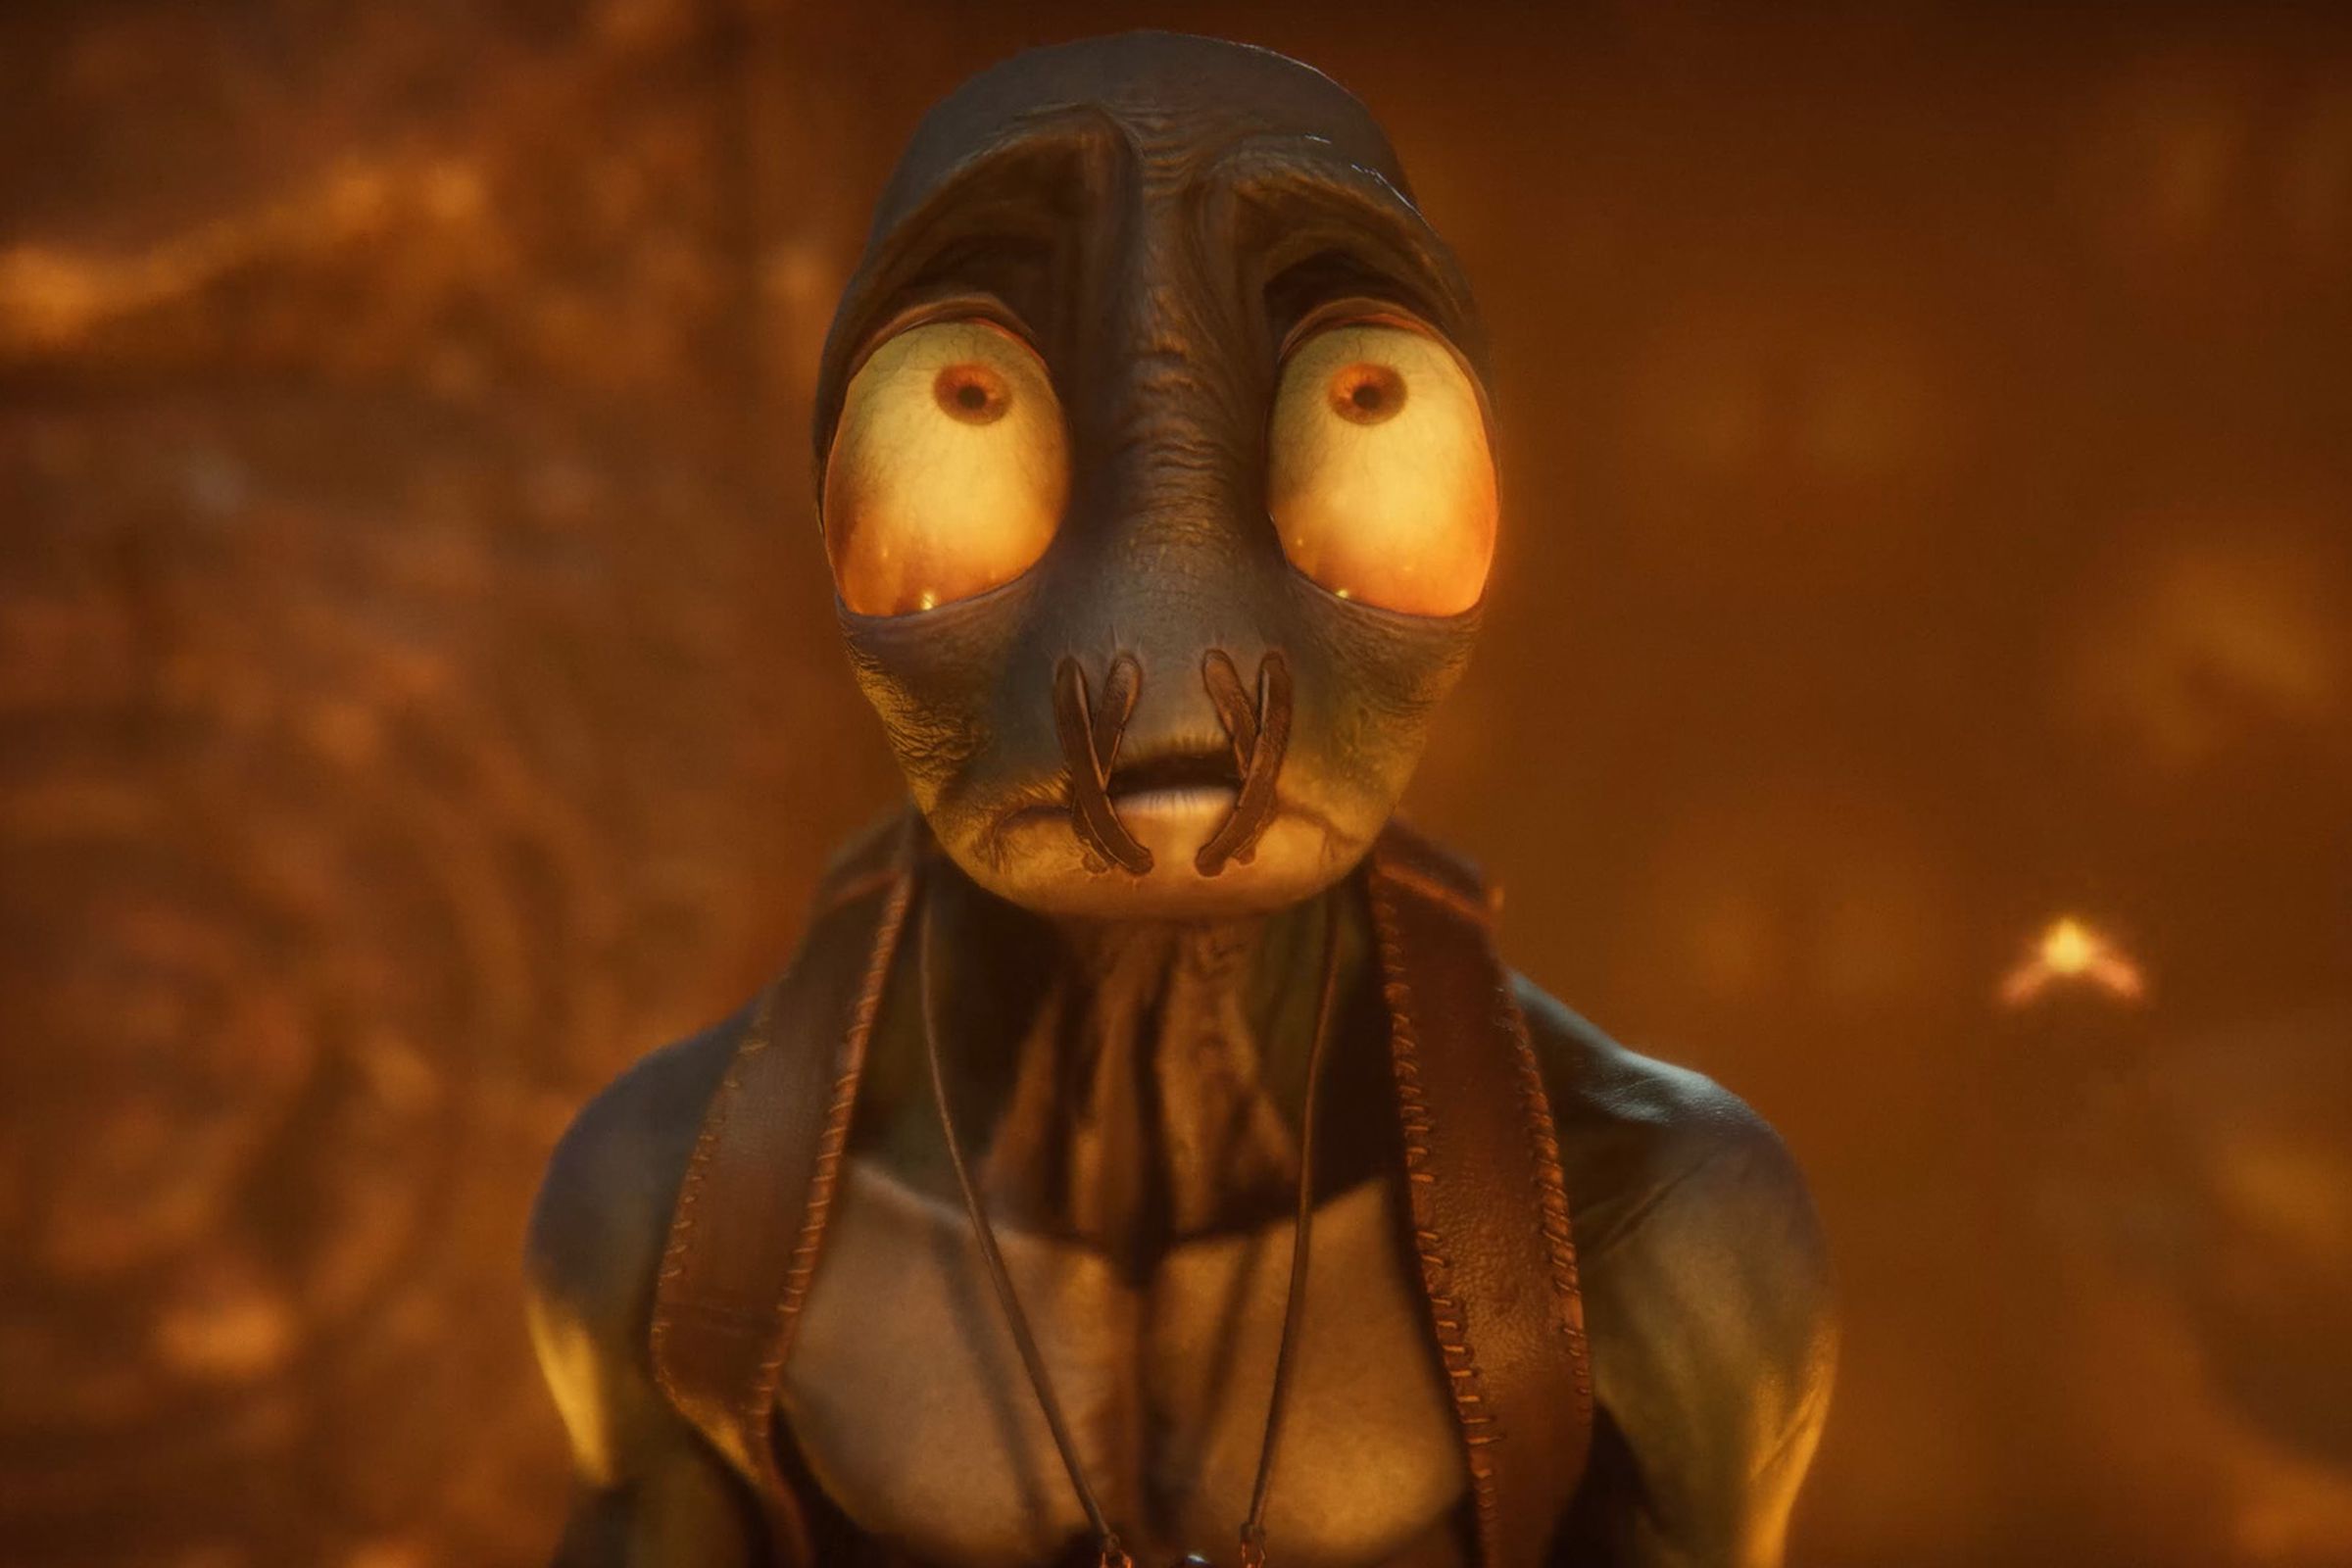 Screenshot from Oddworld Soulstorm in which a blue, hairless alien creature with huge yellow eyes stares at something above him in horrified awe.